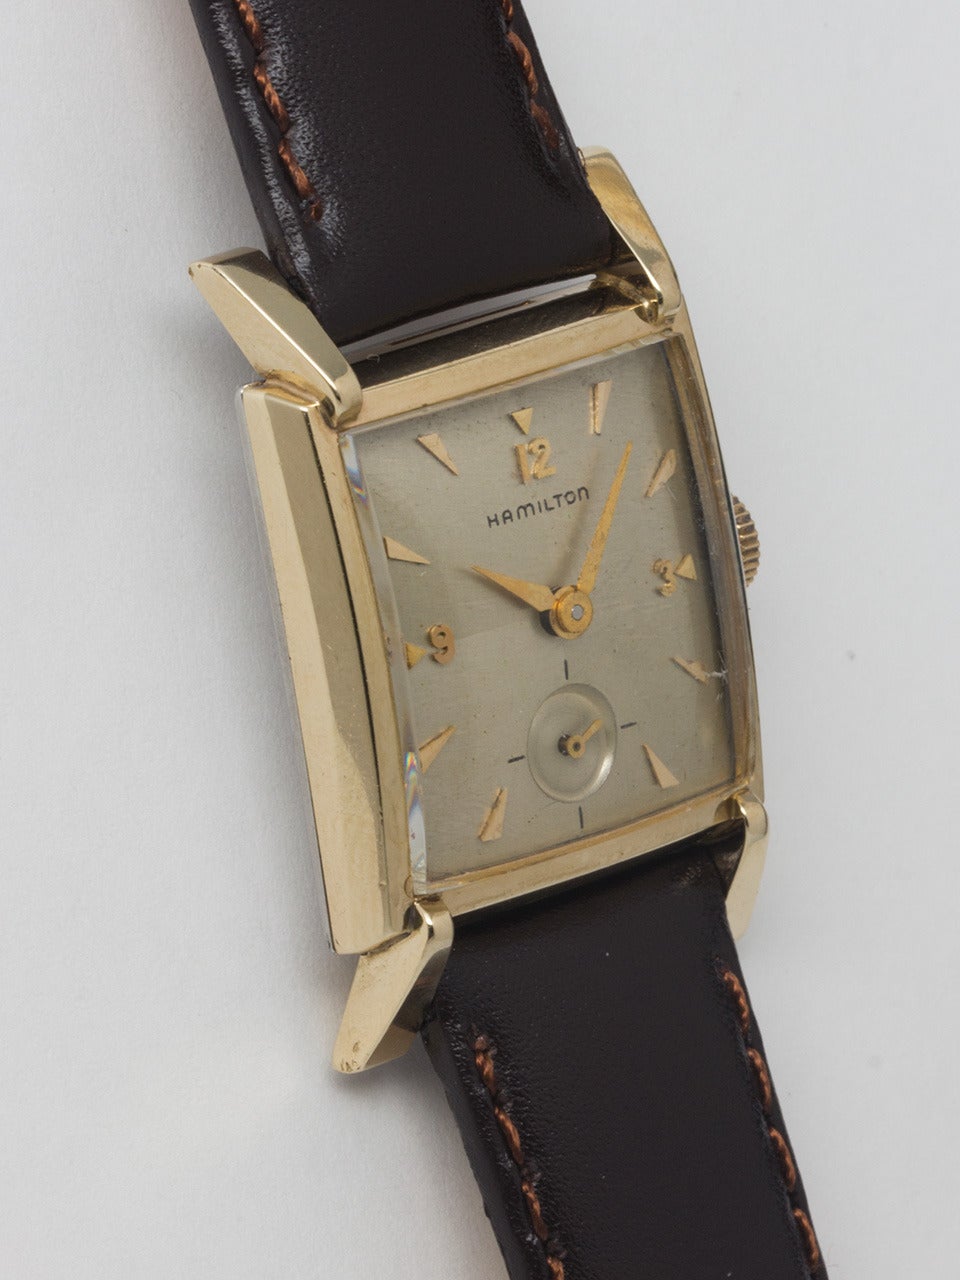 Hamillton yellow gold-filled wristwatch, Romanesque S mode, circa 1950s. Short rectangular case with extended flared lugs measuring 24 x 36.75mm. Original silvered satin dial with applied indexes and alpha hands. Powered by a 17-jewel manual-wind